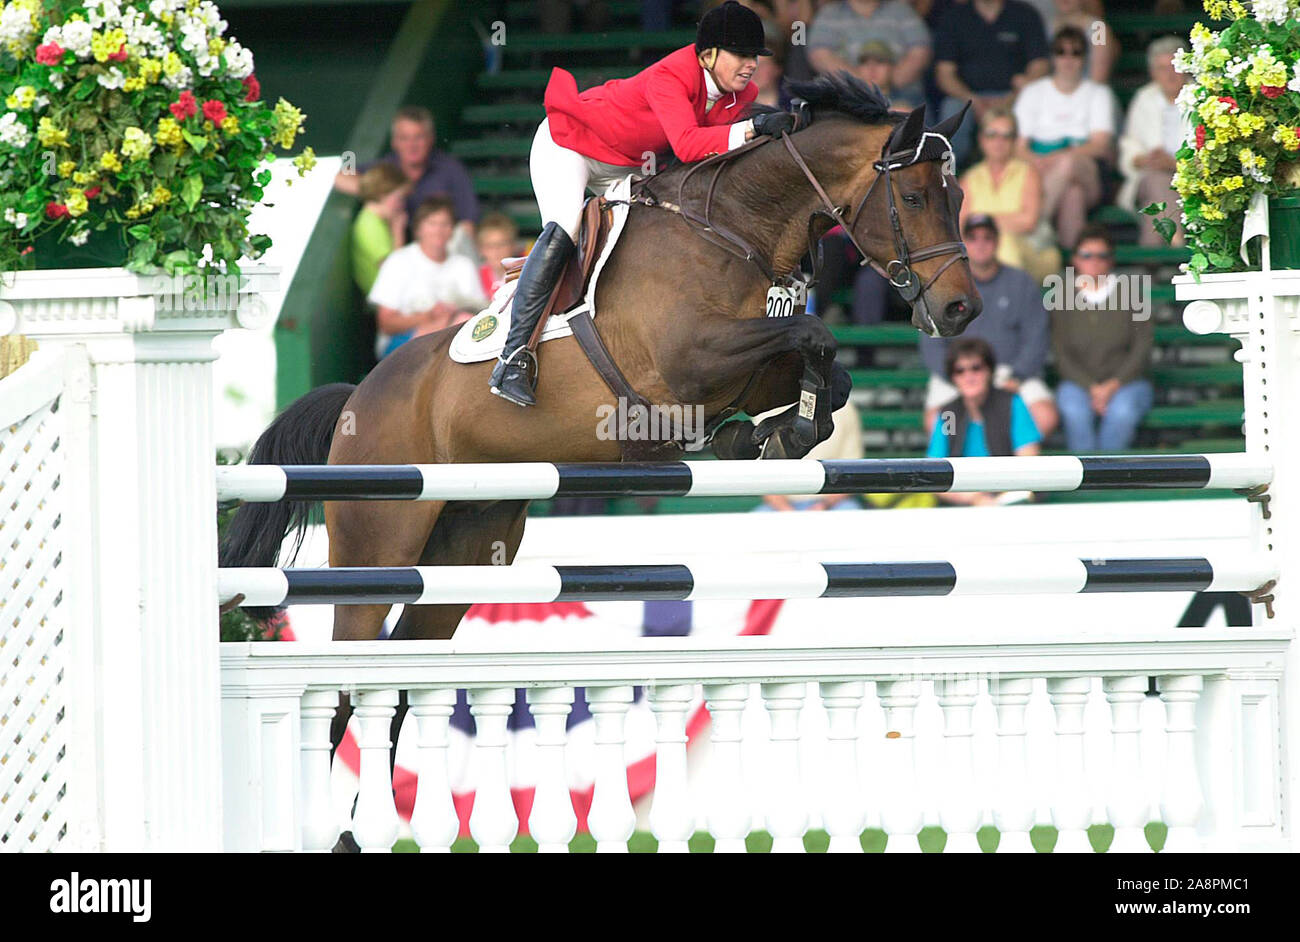 The National, Spruce Meadows June 2002, Jill Henselwood (CAN) riding ...